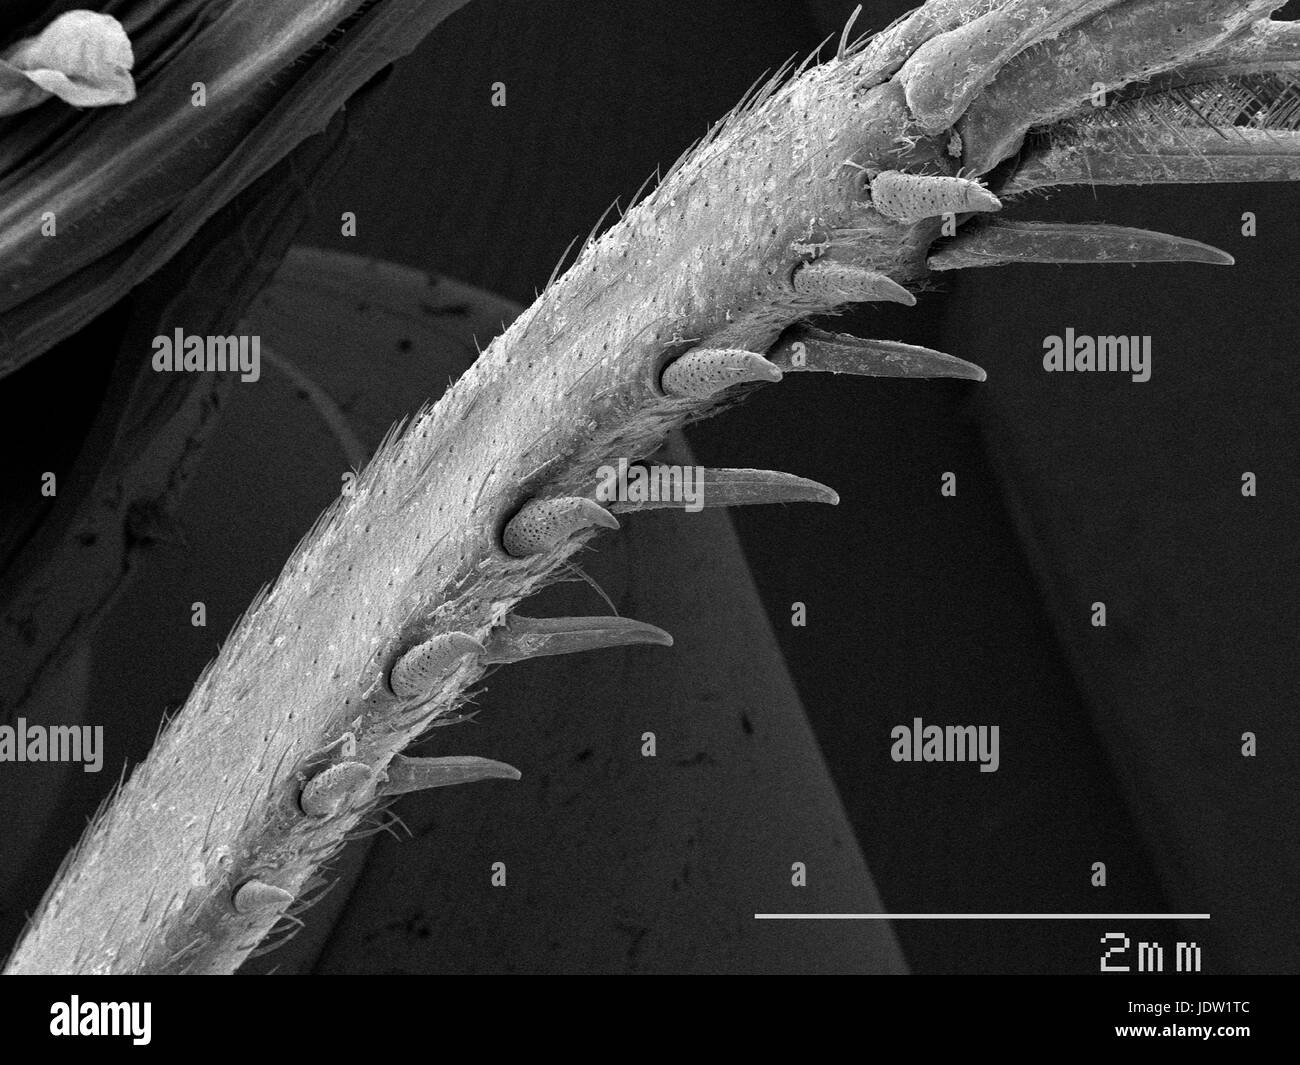 Magnified view of cricket leg spurs Stock Photo